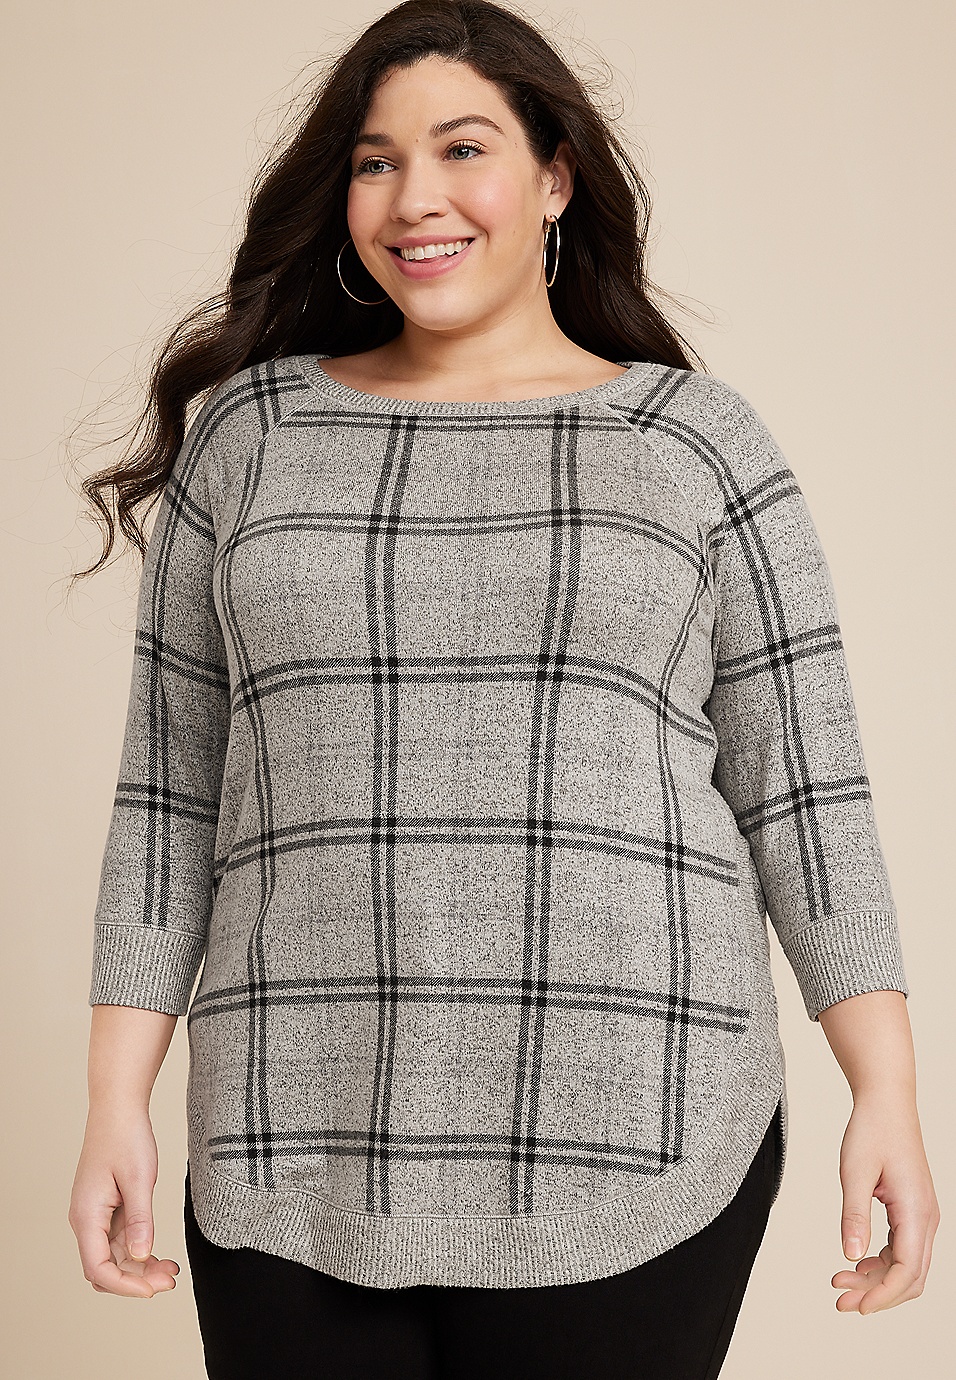 Plus Size Top | maurices